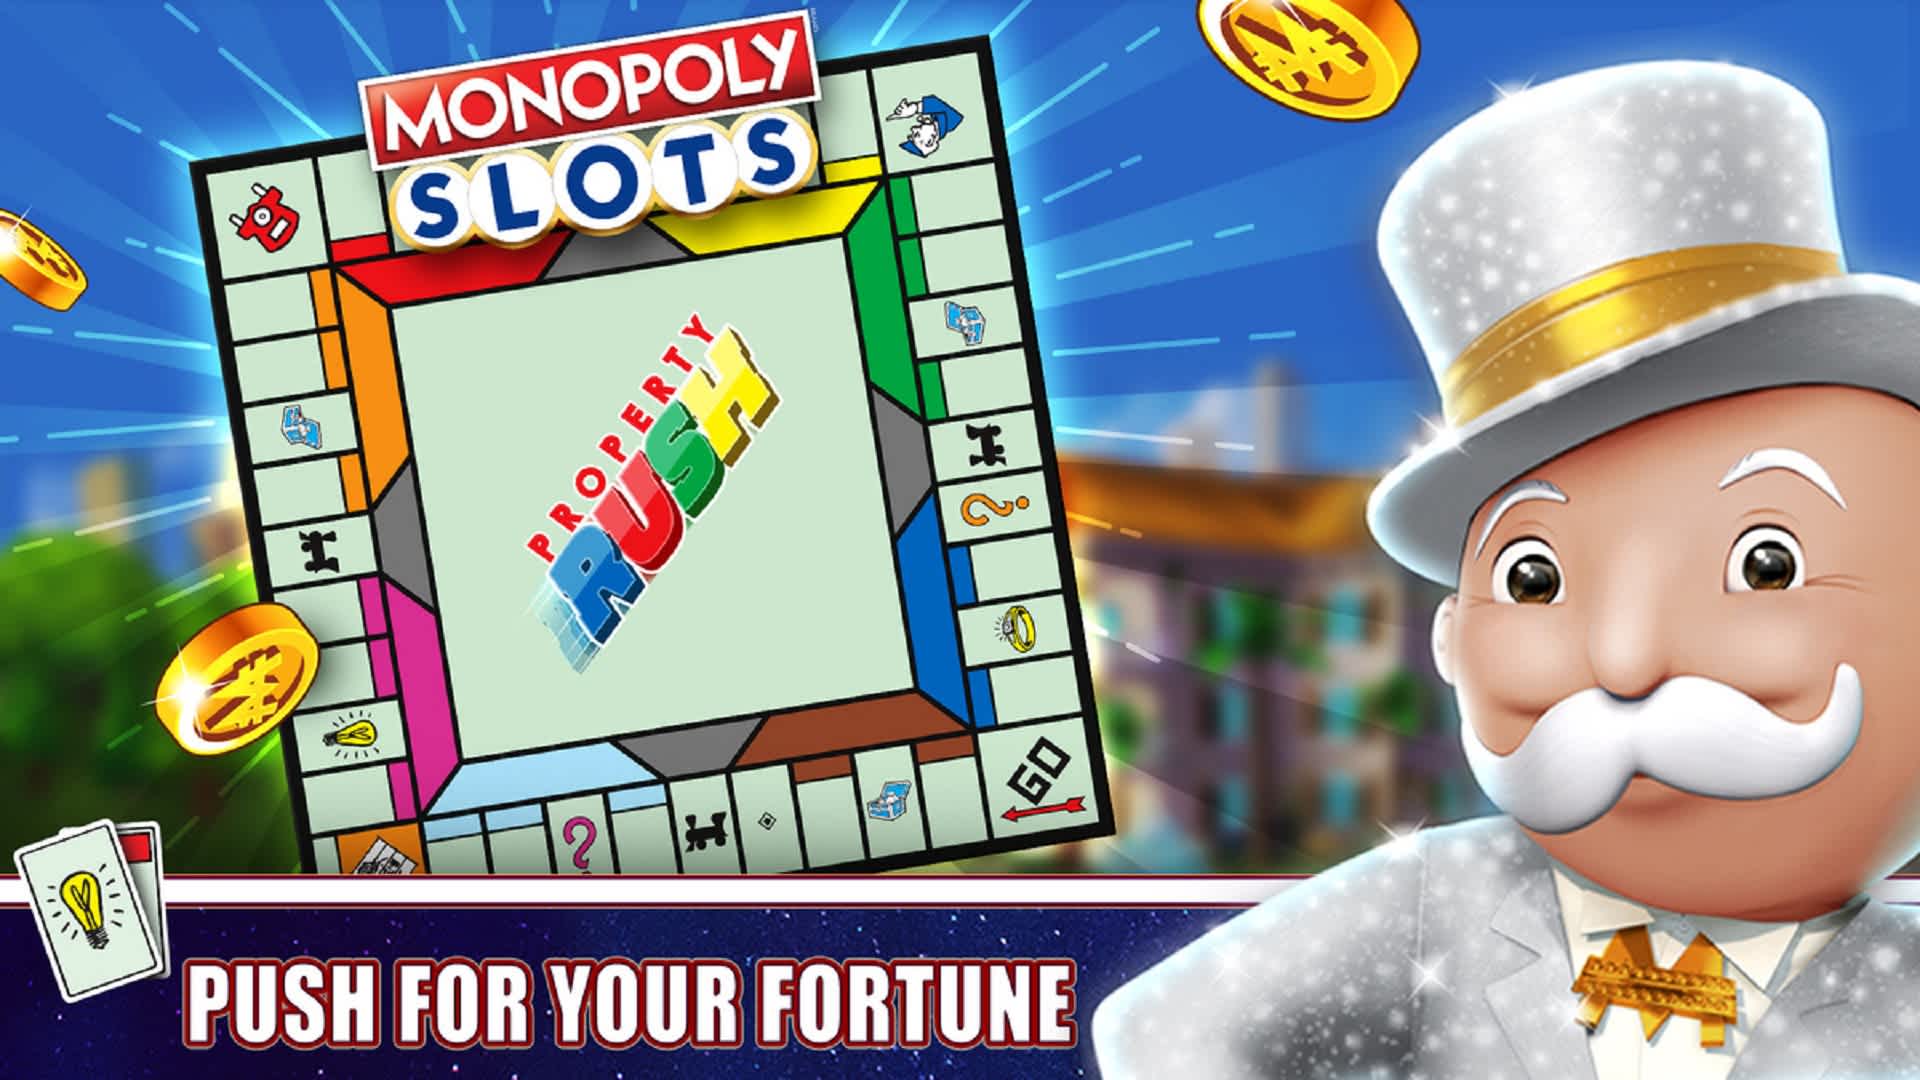 “Monopoly play online”